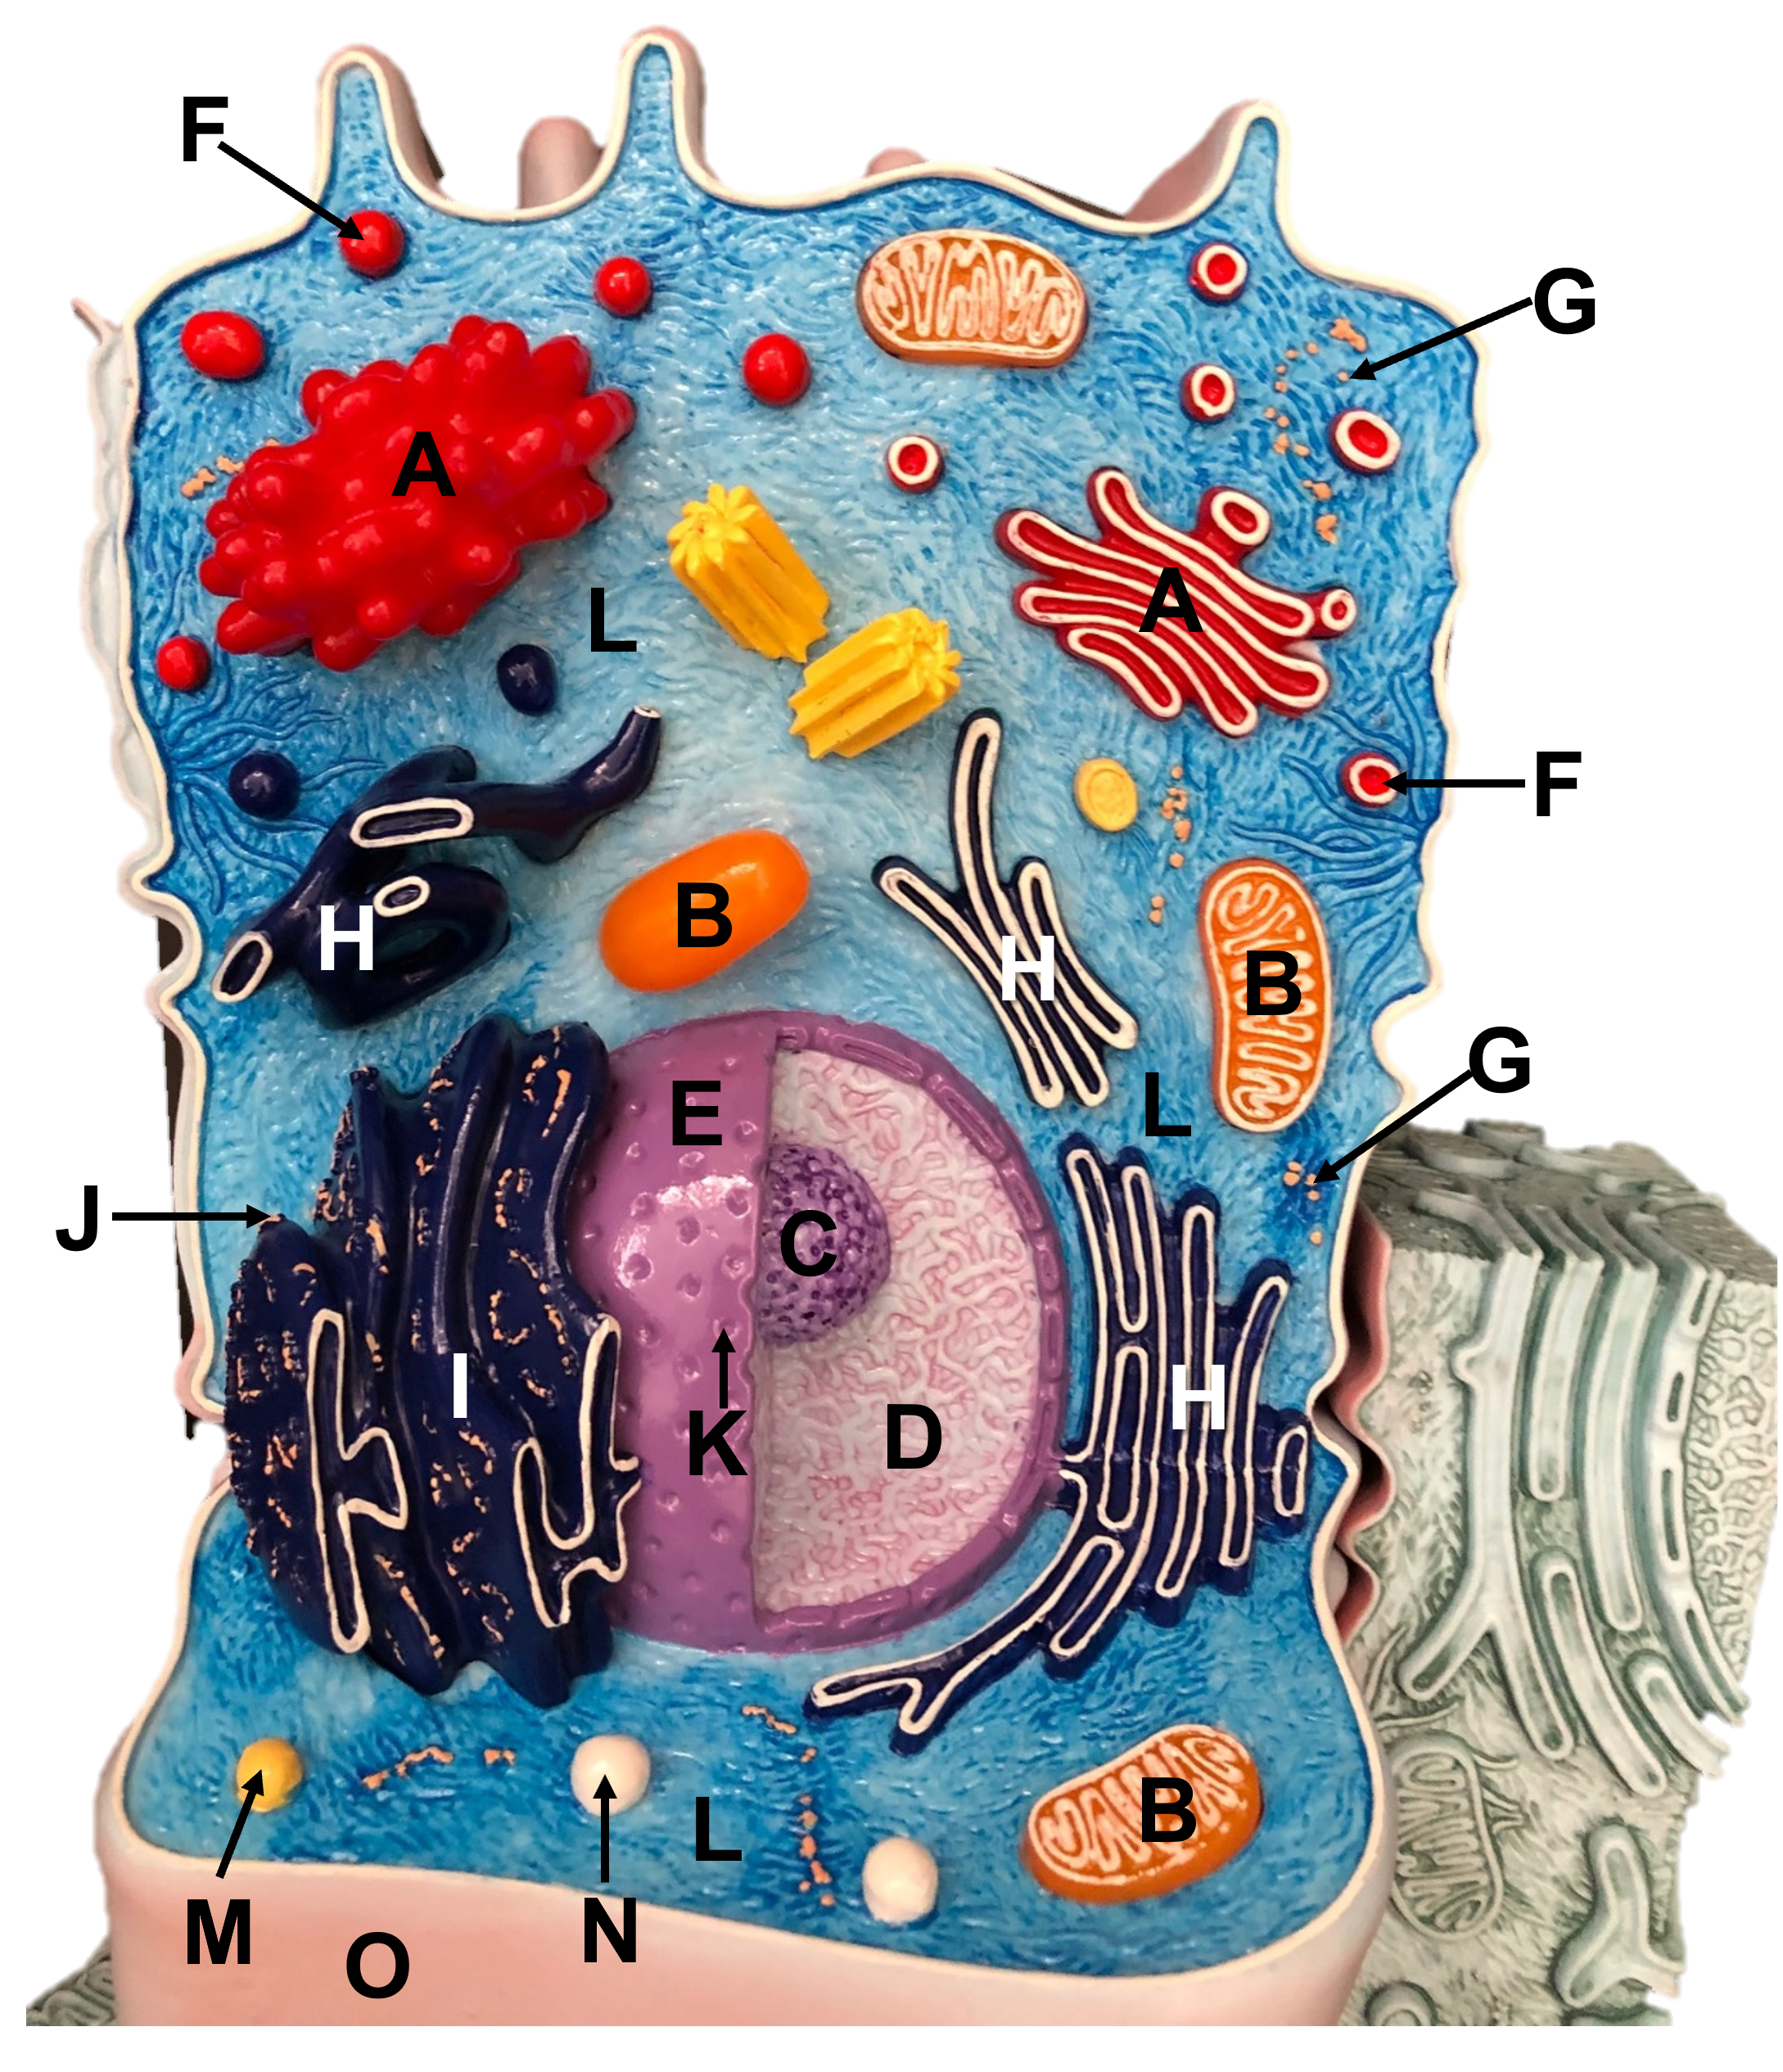 eukaryotic cell model with parts labeled with letters